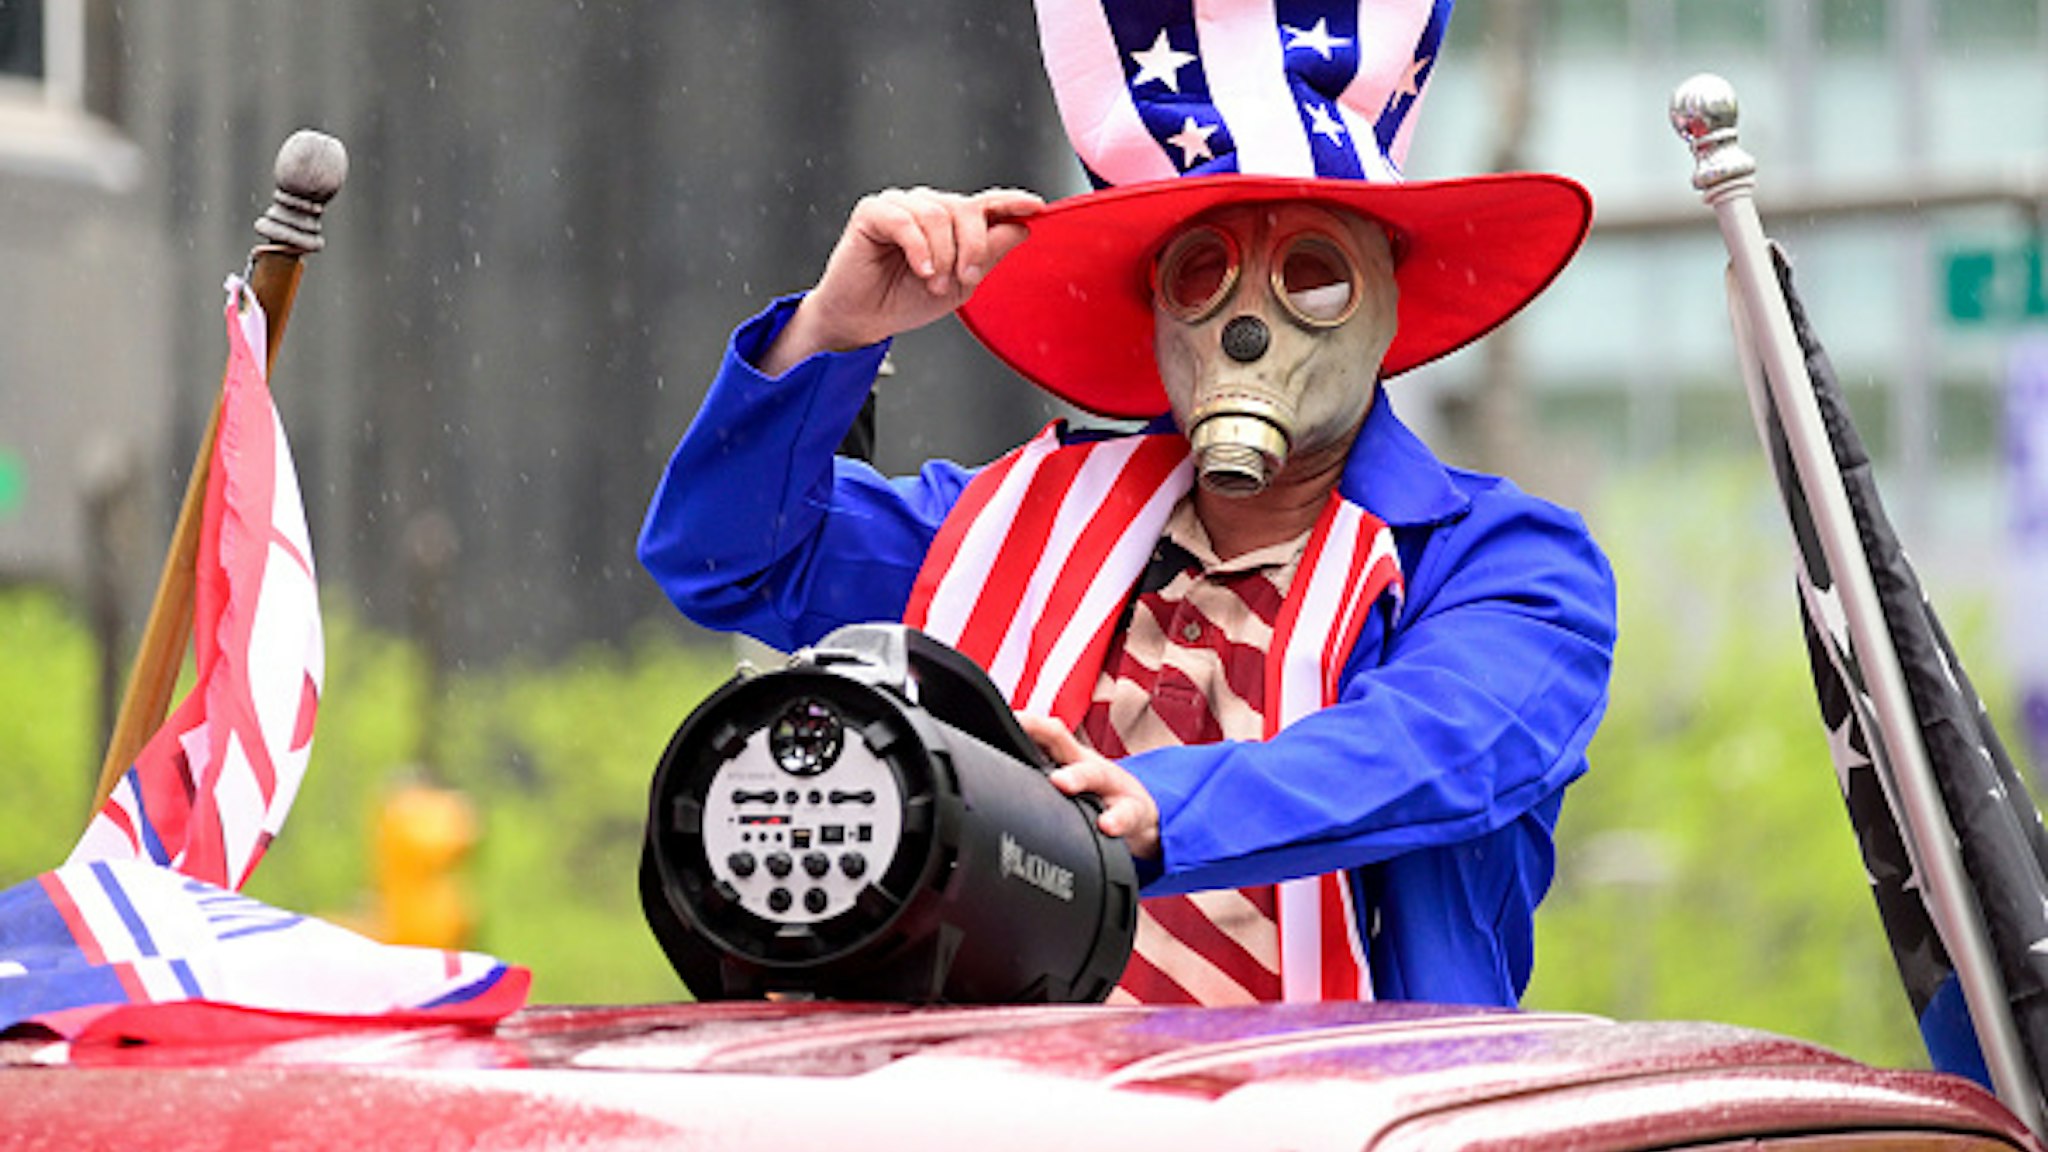 Robert McMaster, of Bridesburg stands on the bed of a pick-up while wearing a mask as he participates in a Reopen protest, at City Hall in Philadelphia, PA; on May 8, 2020. Protestors gather to demand reopening of the state during a rally. This week Governor Tom Wolf extends Stay-at-home order for the region.